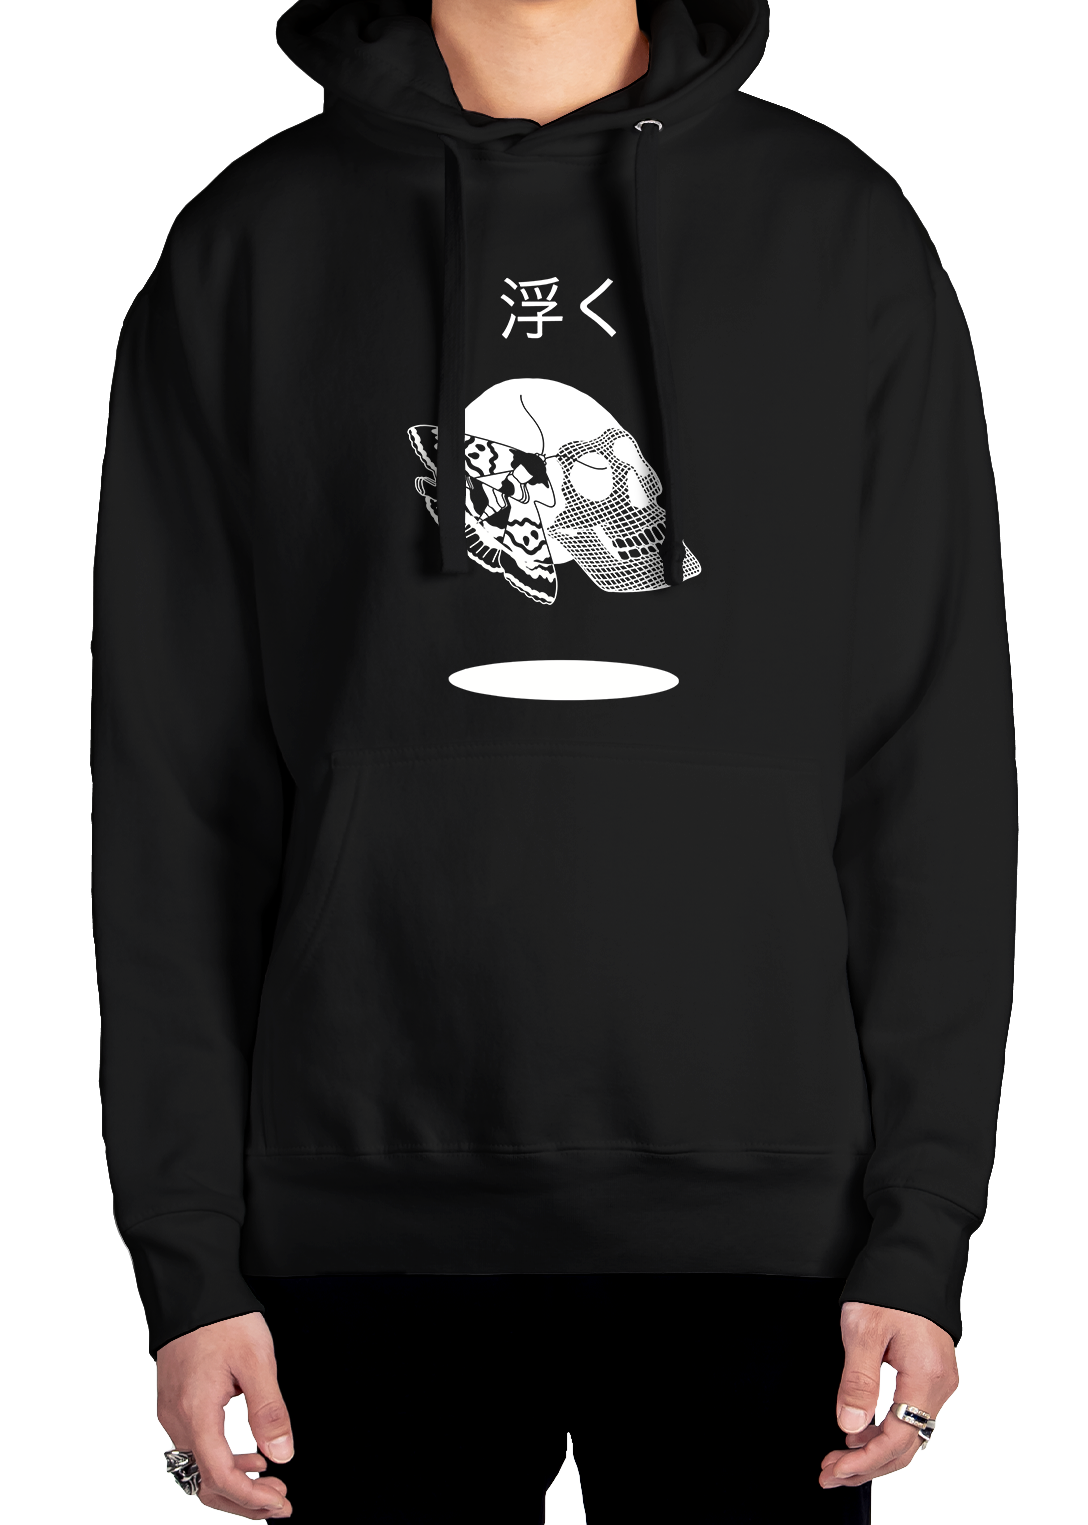 Project Monarch Hoodie